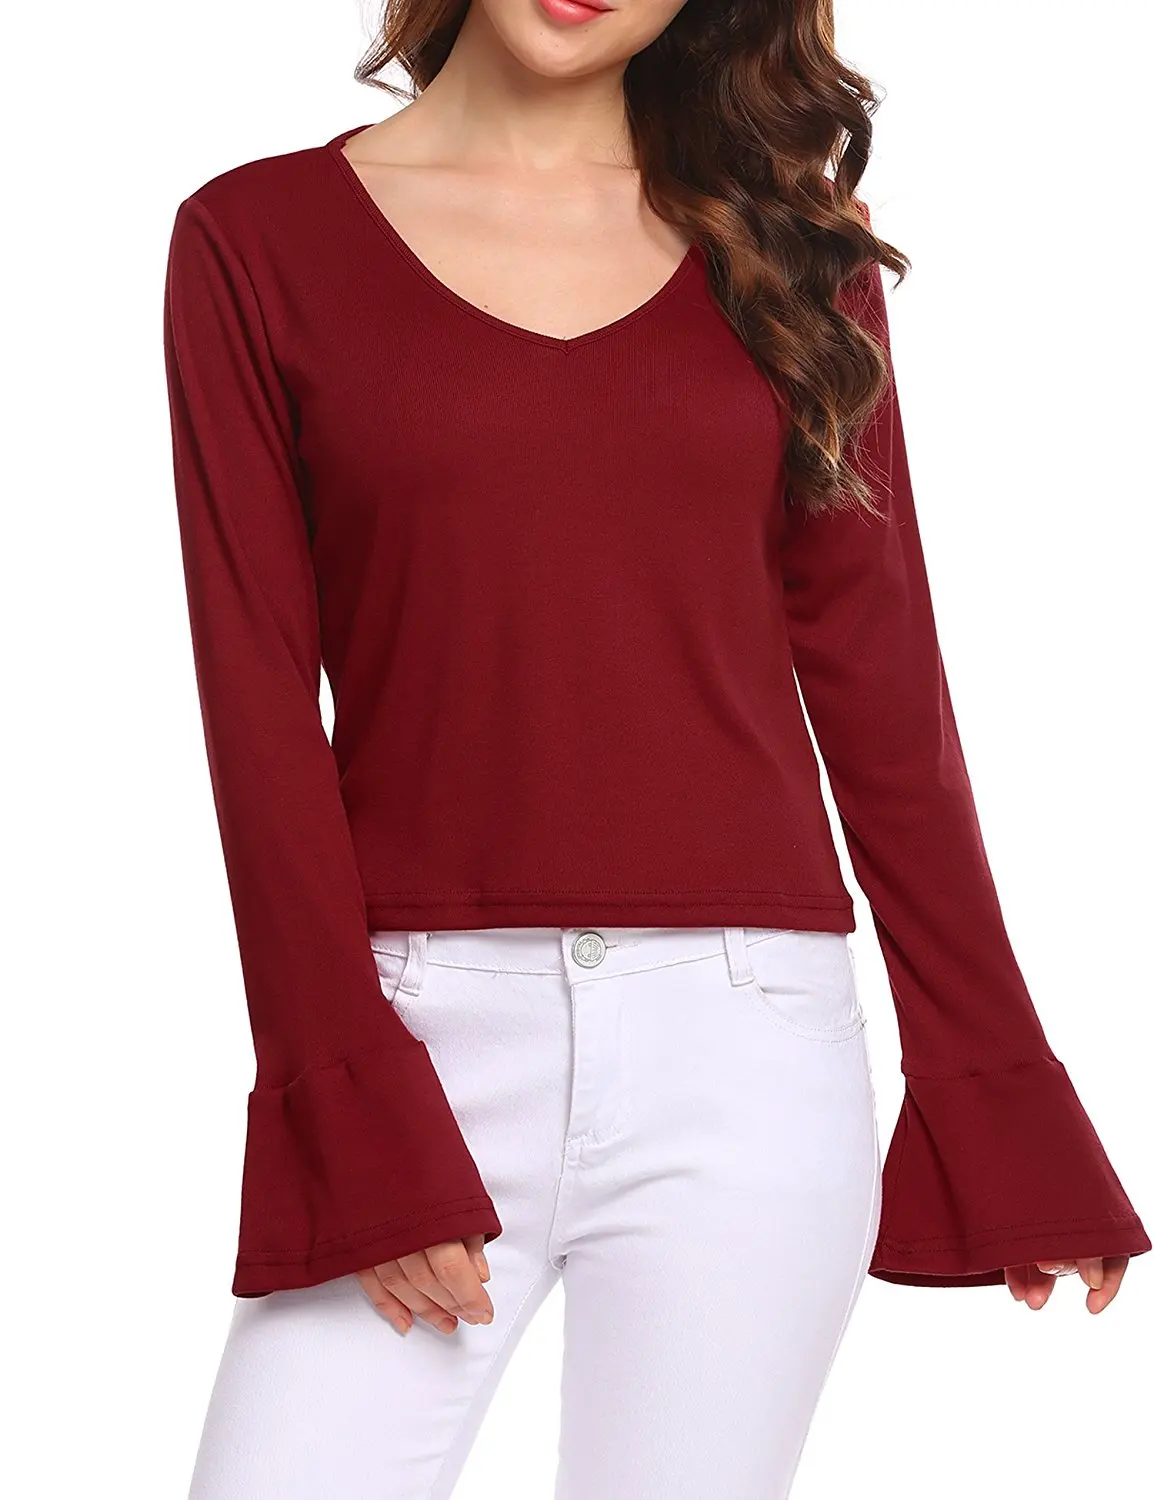 womens red dressy tops